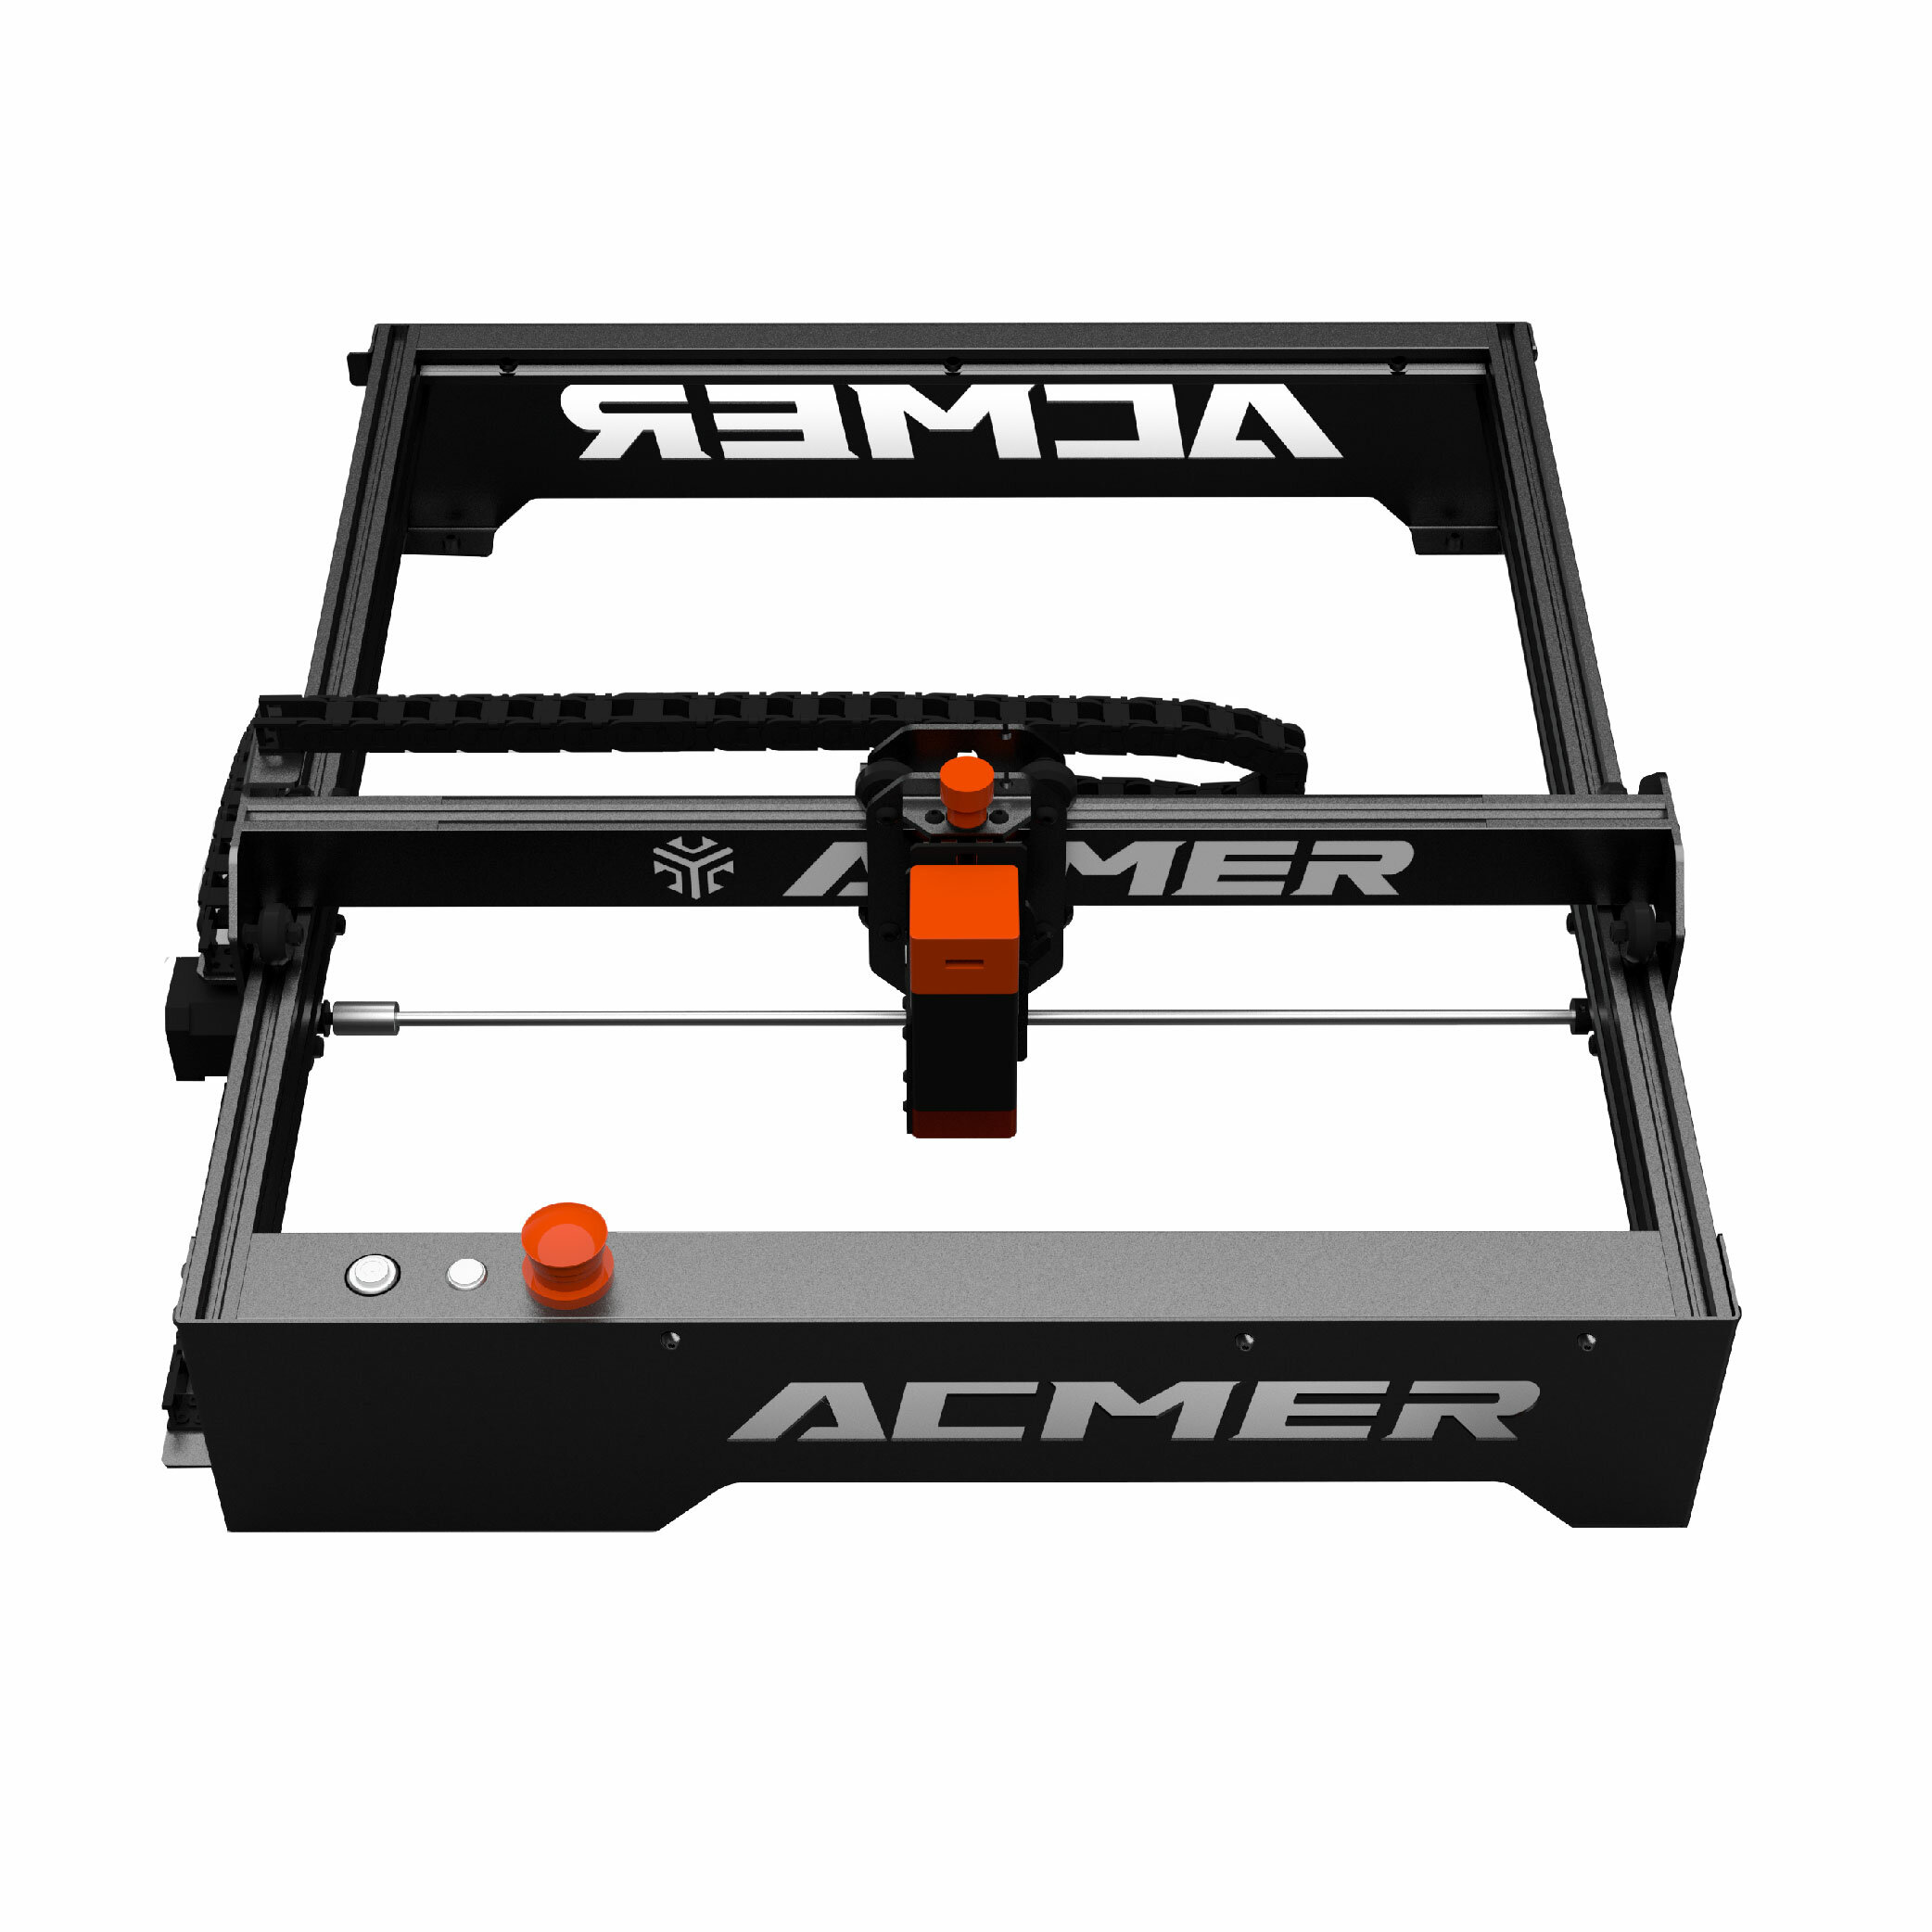 

ACMER P1 Laser Engraver 10W Laser Cutter Carving Machine High Engraving Carving Speed 400x410mm Engraving Area for Wifi